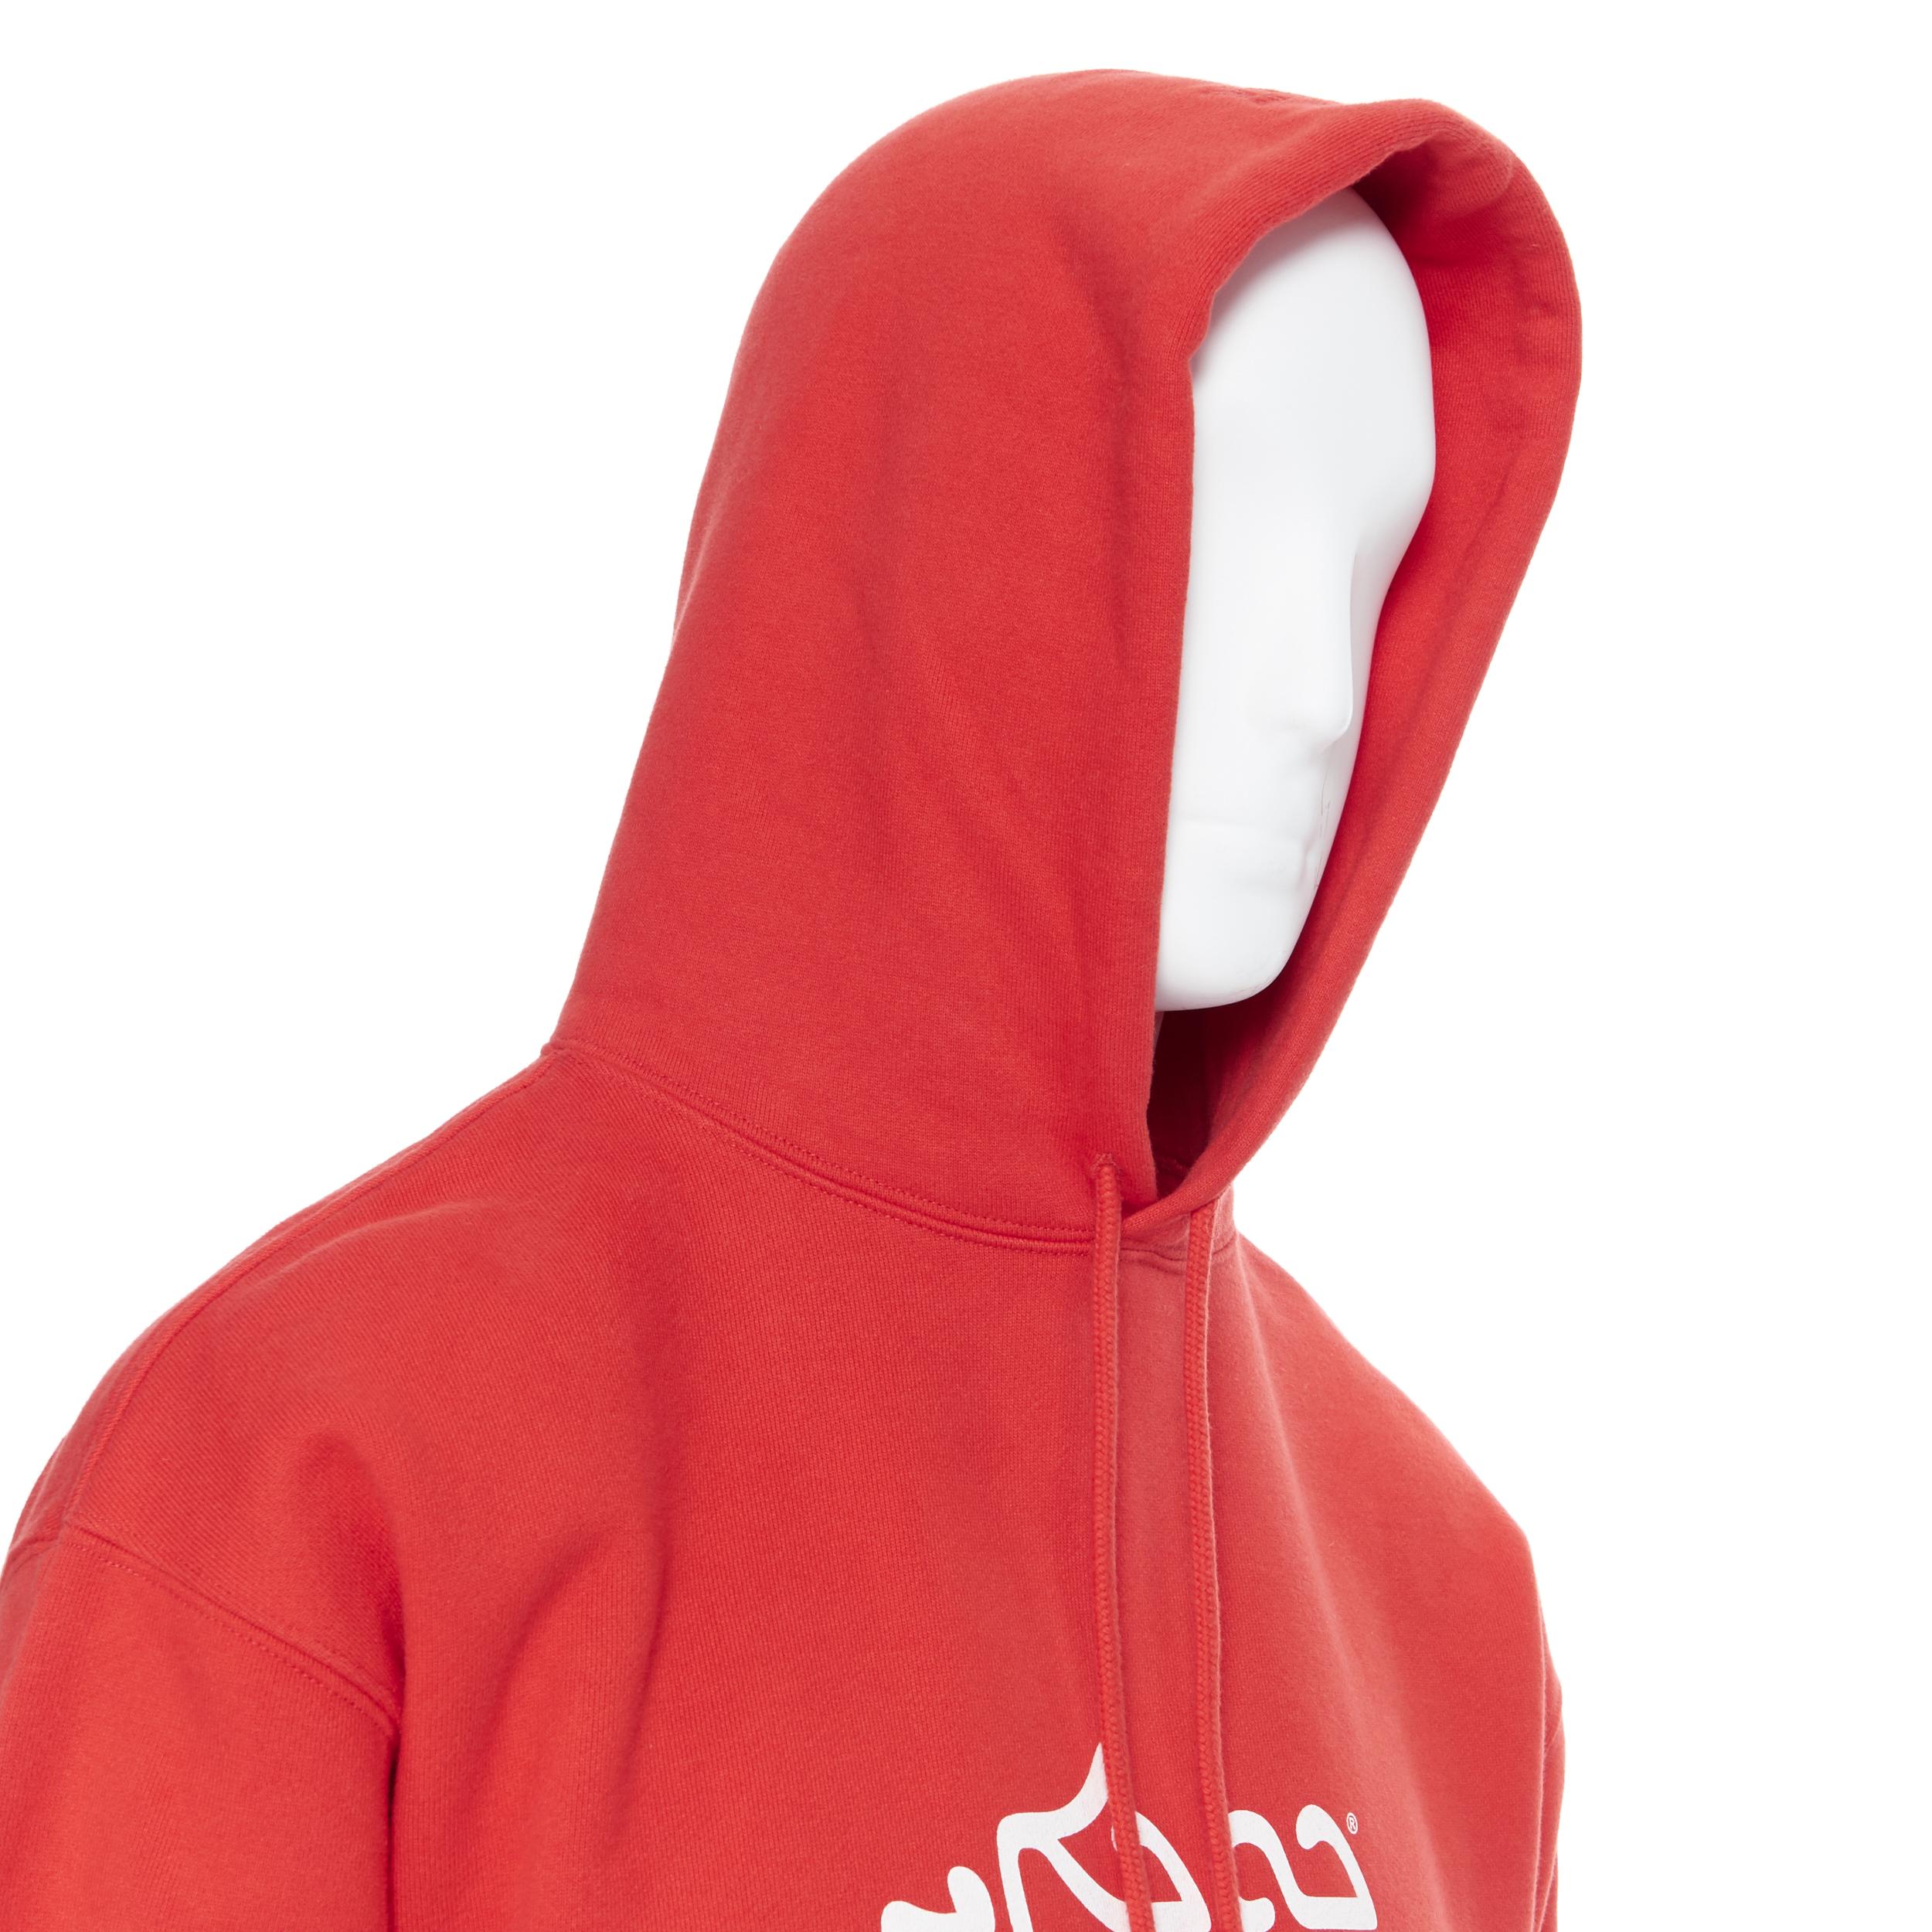 new VETEMENTS AW20 Big Cocaine red arabic Coke logo cropped hoodie sweater L 2